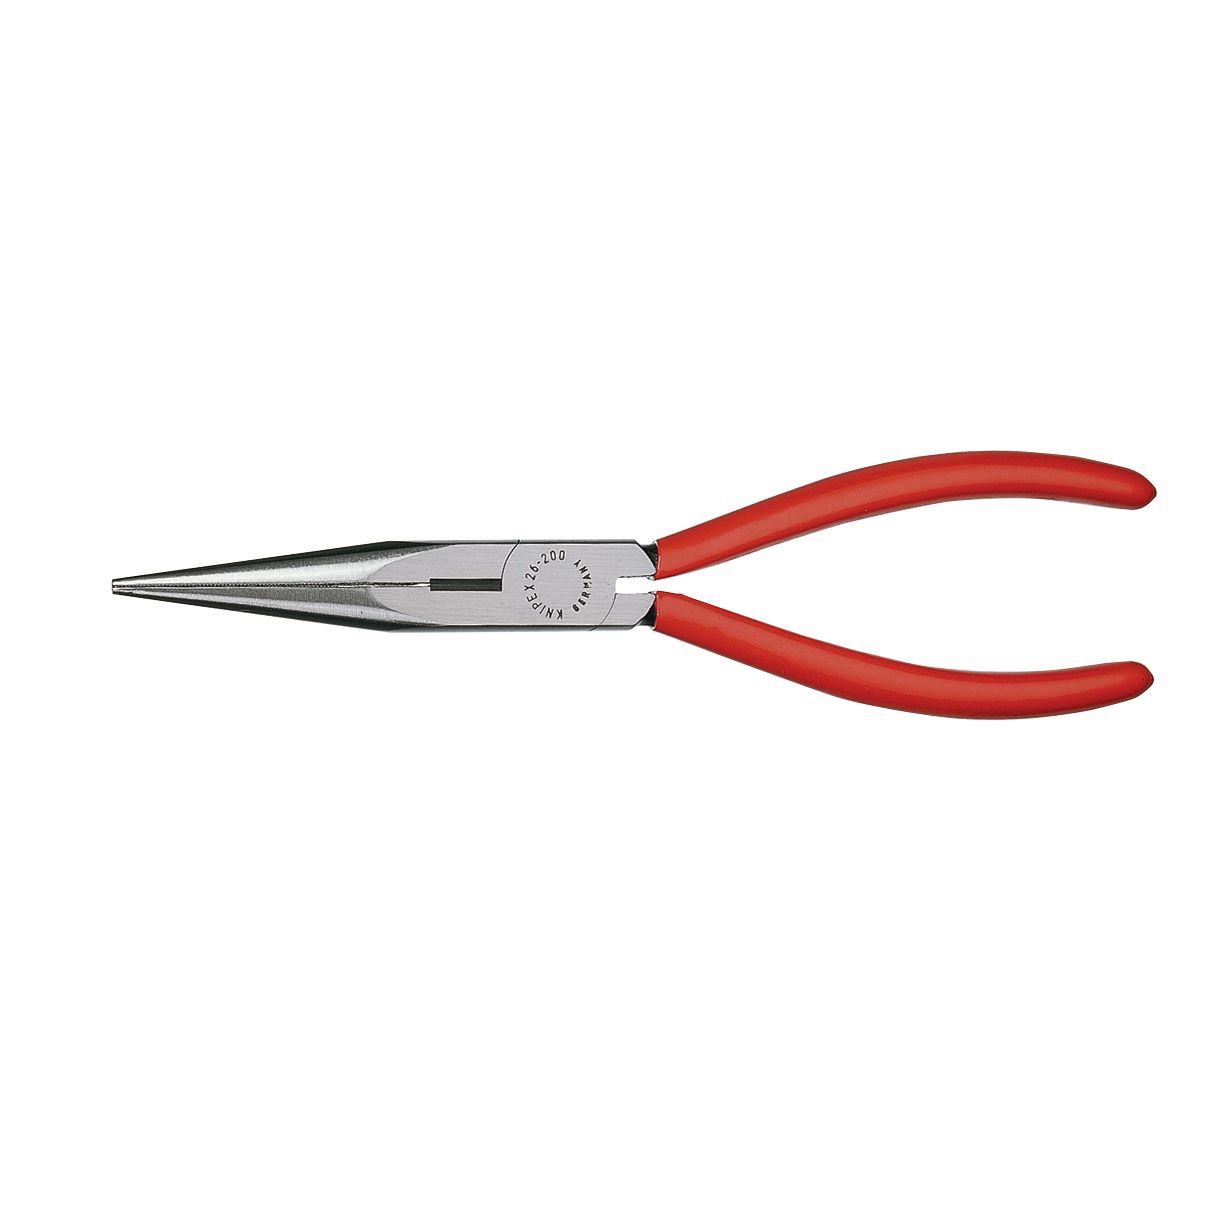 Knipex 8" Long nose pliers w/ cutter